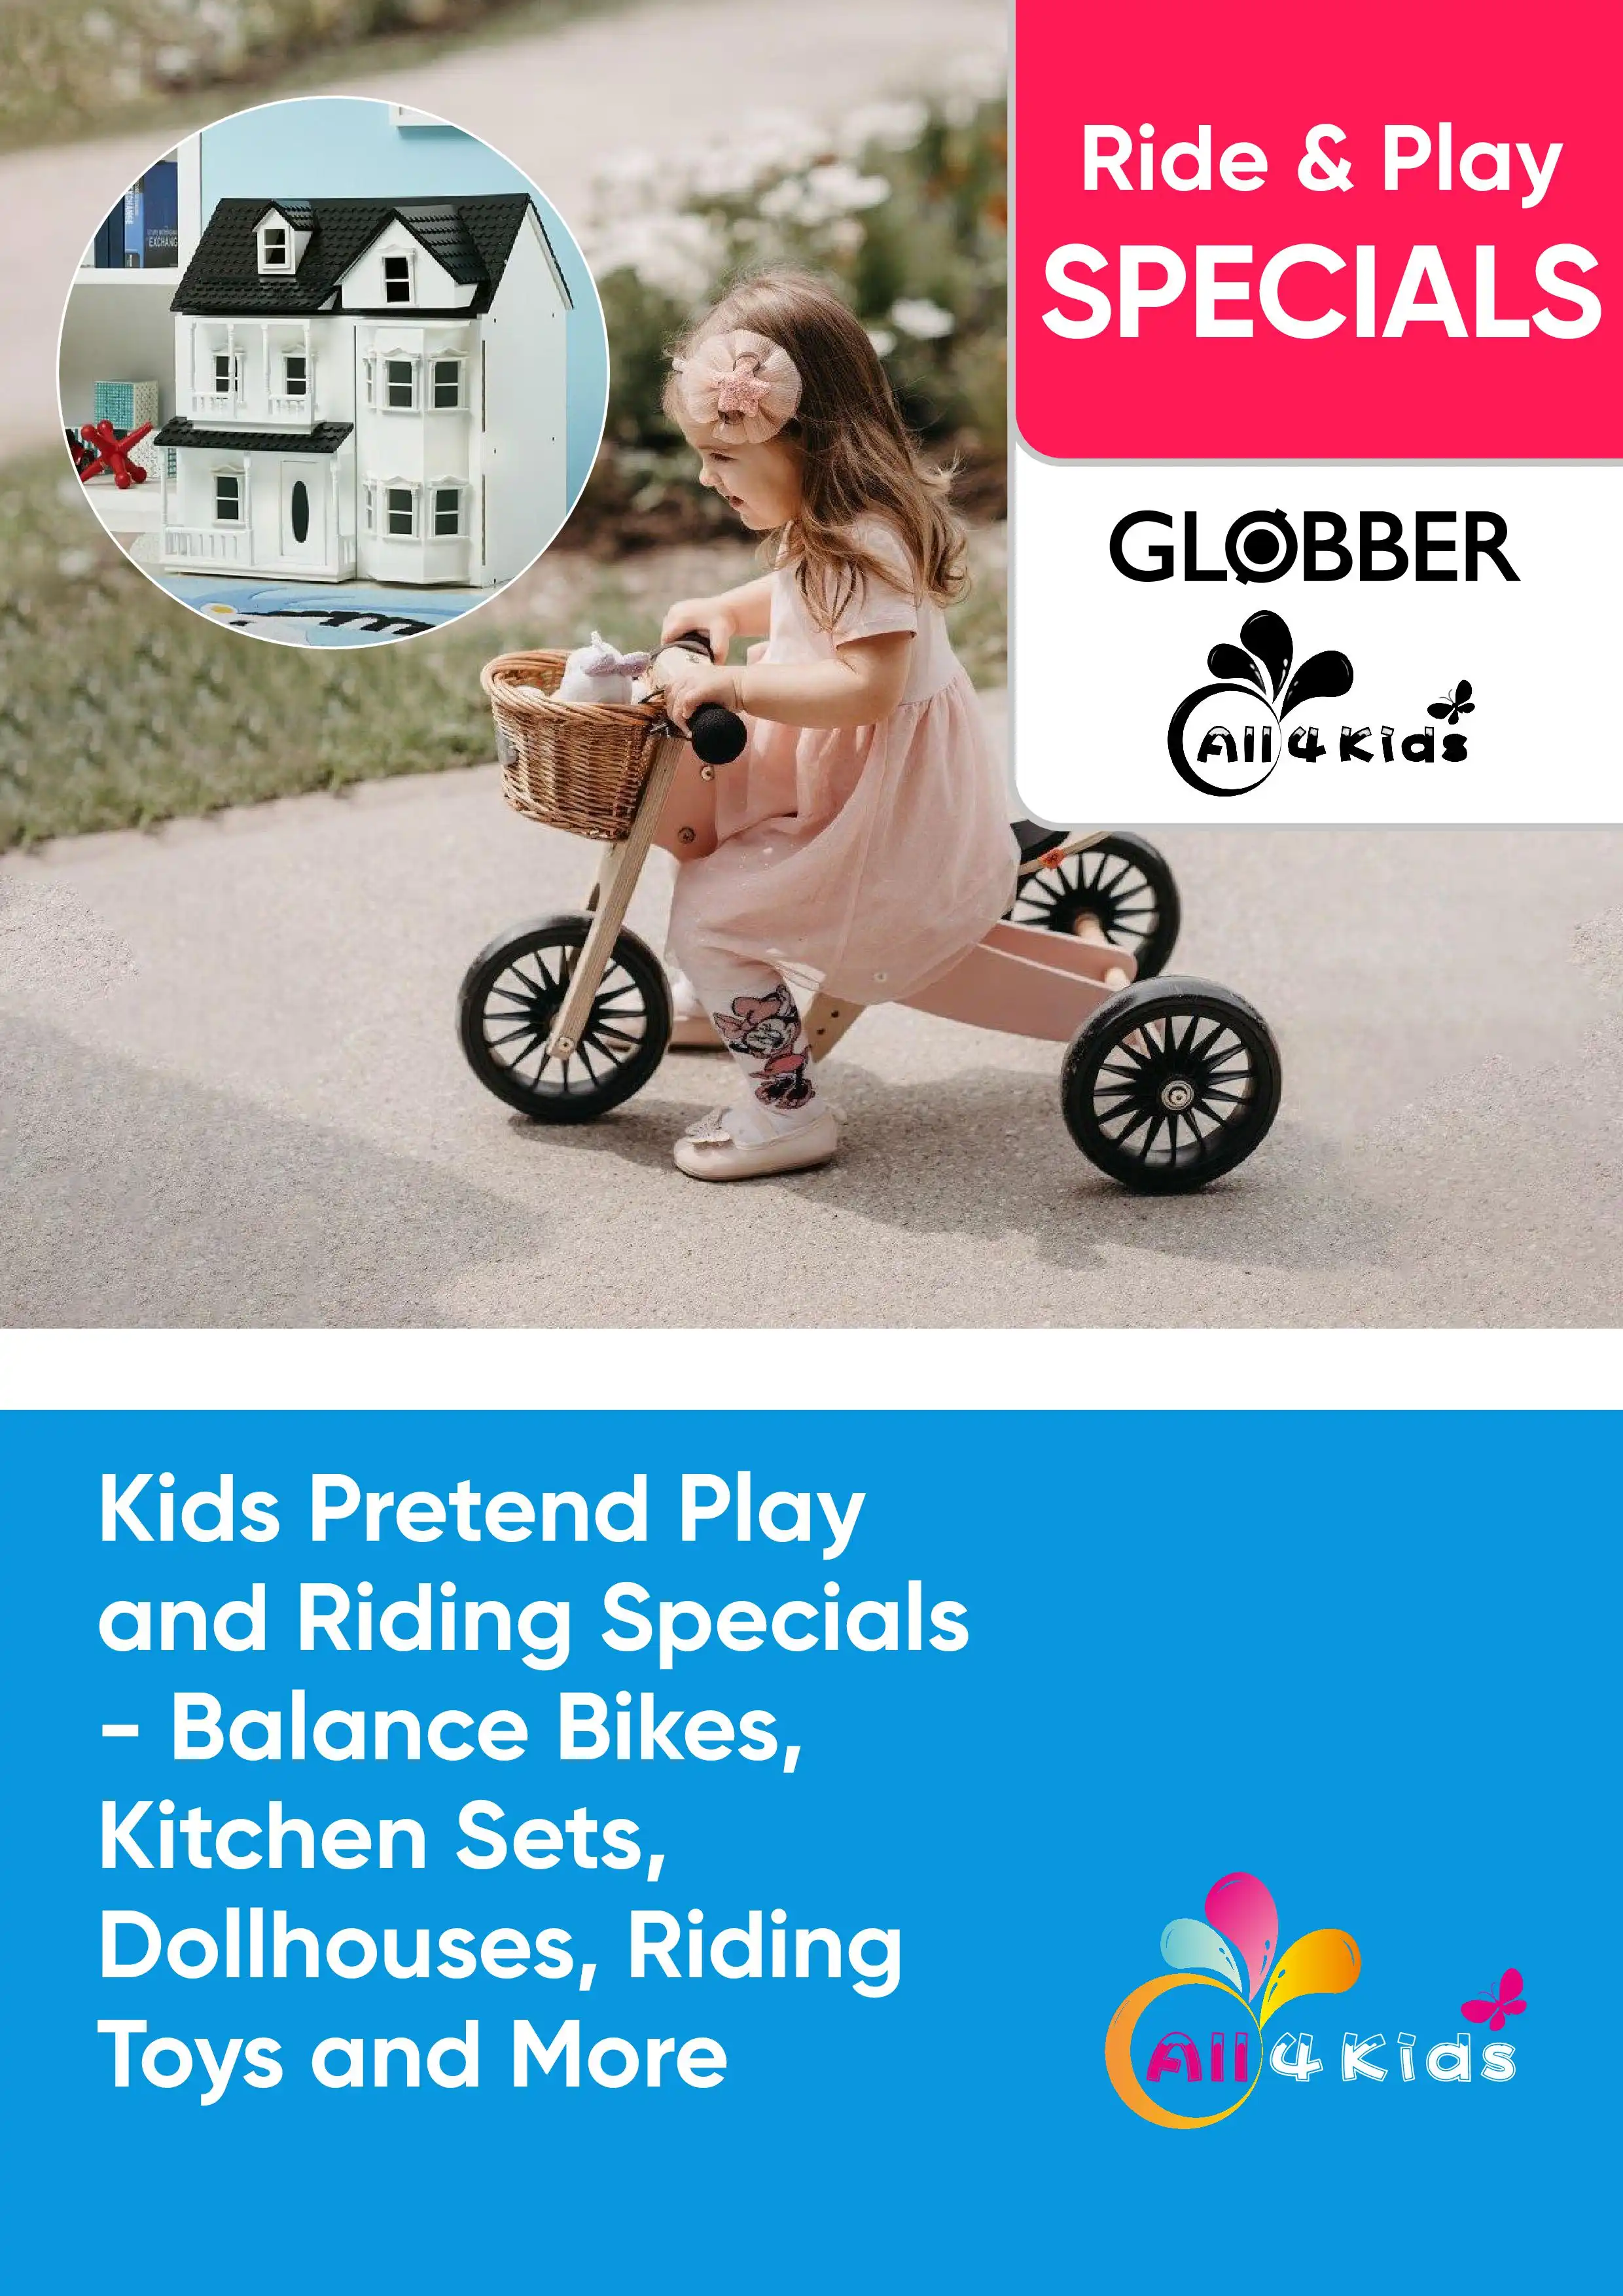 Kids Pretend Play and Riding Specials - Balance Bikes, Kitchen Sets, Dollhouses, Riding Toys and More